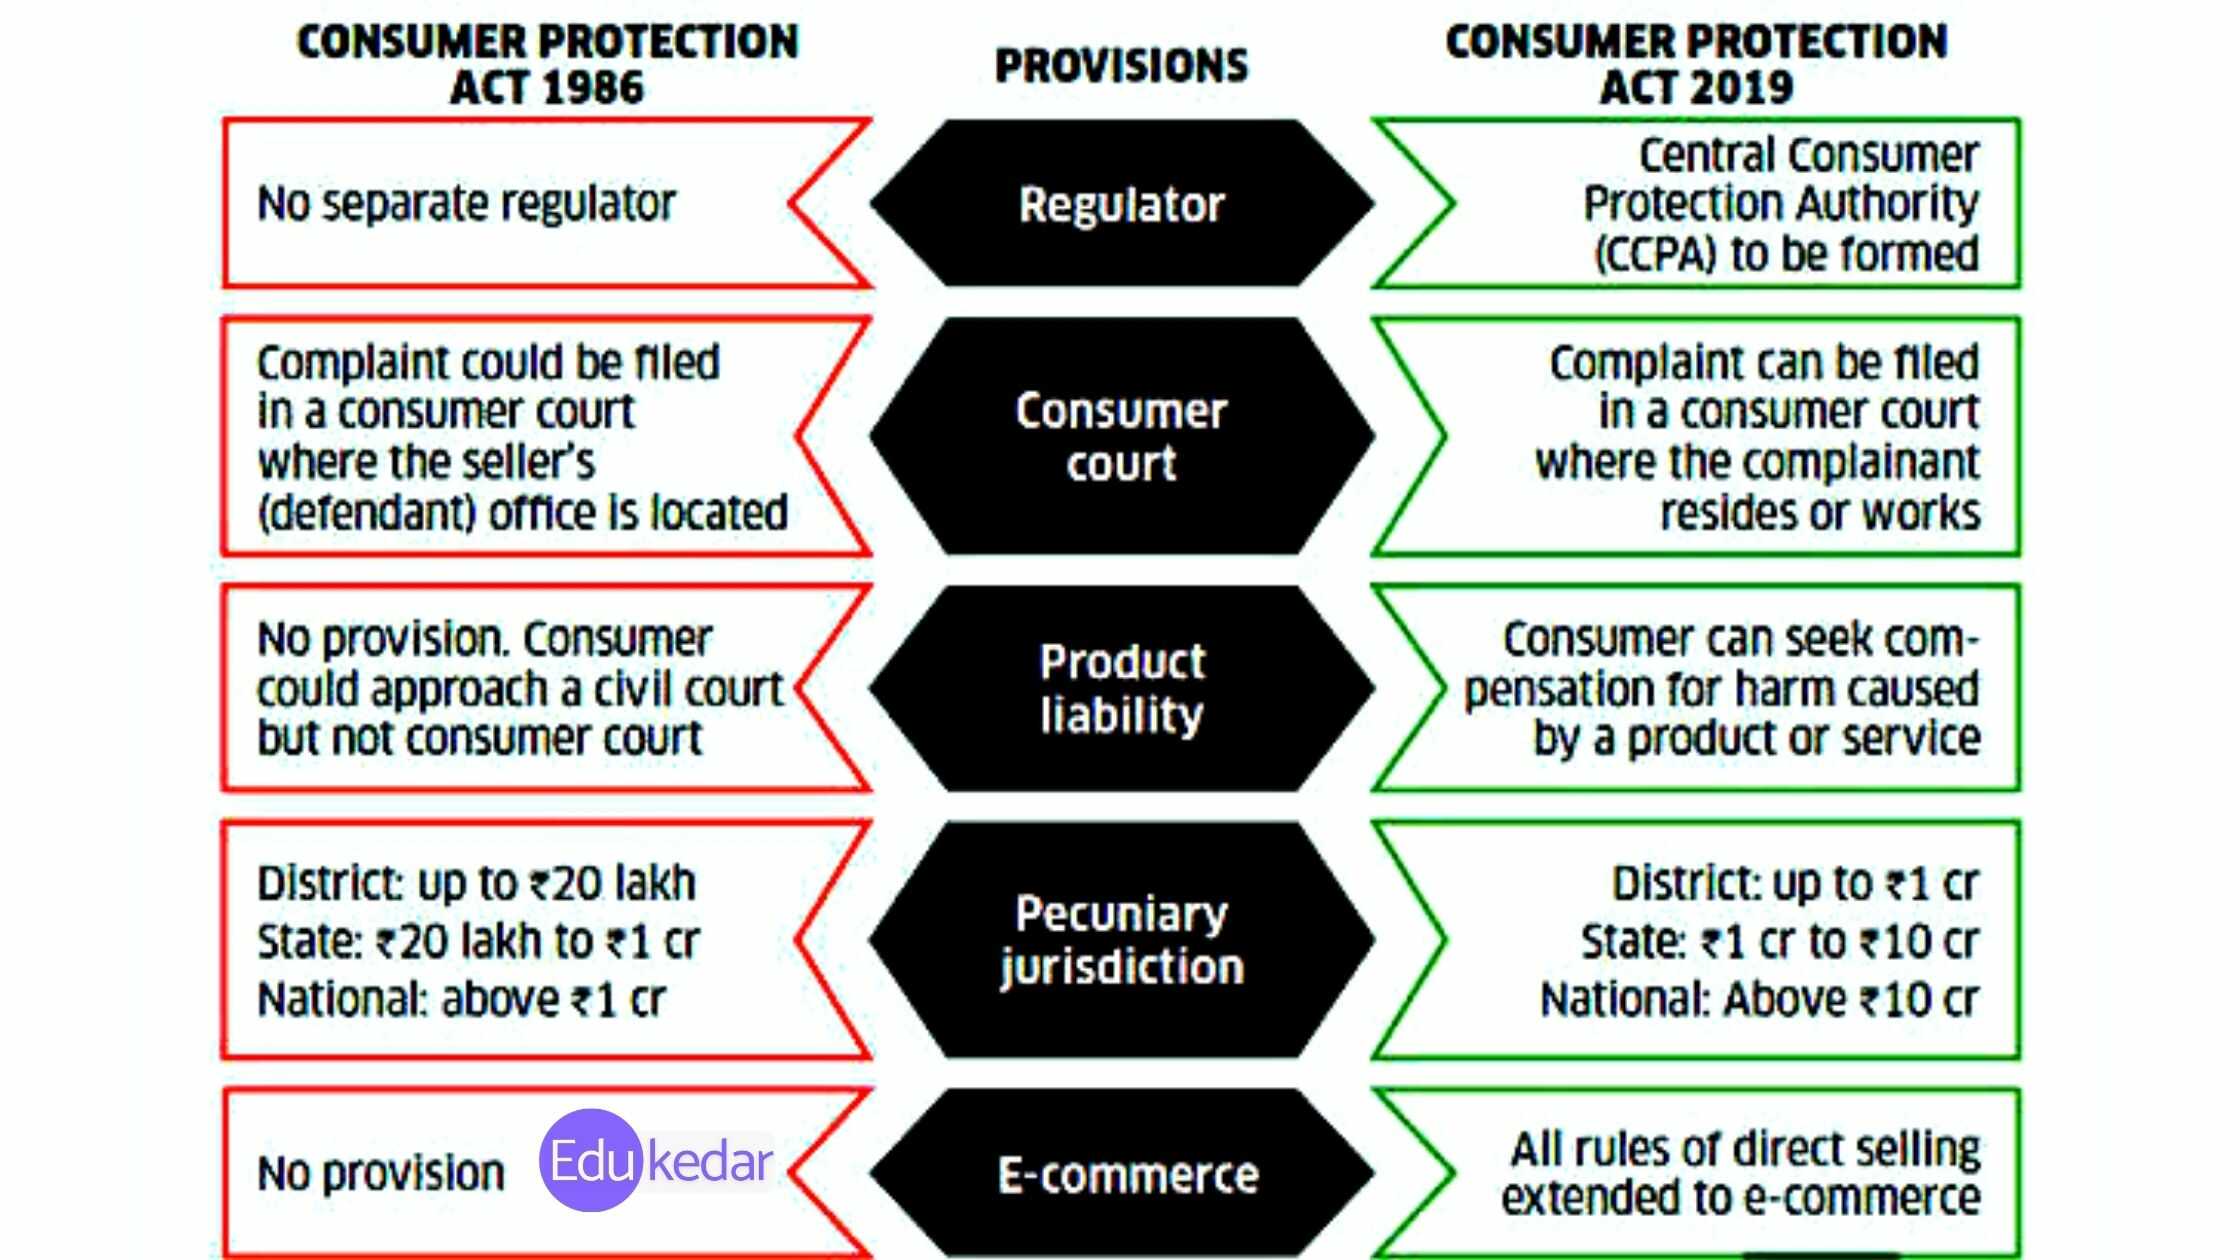 Difference Between Consumer Protection Act 1986 and 2019